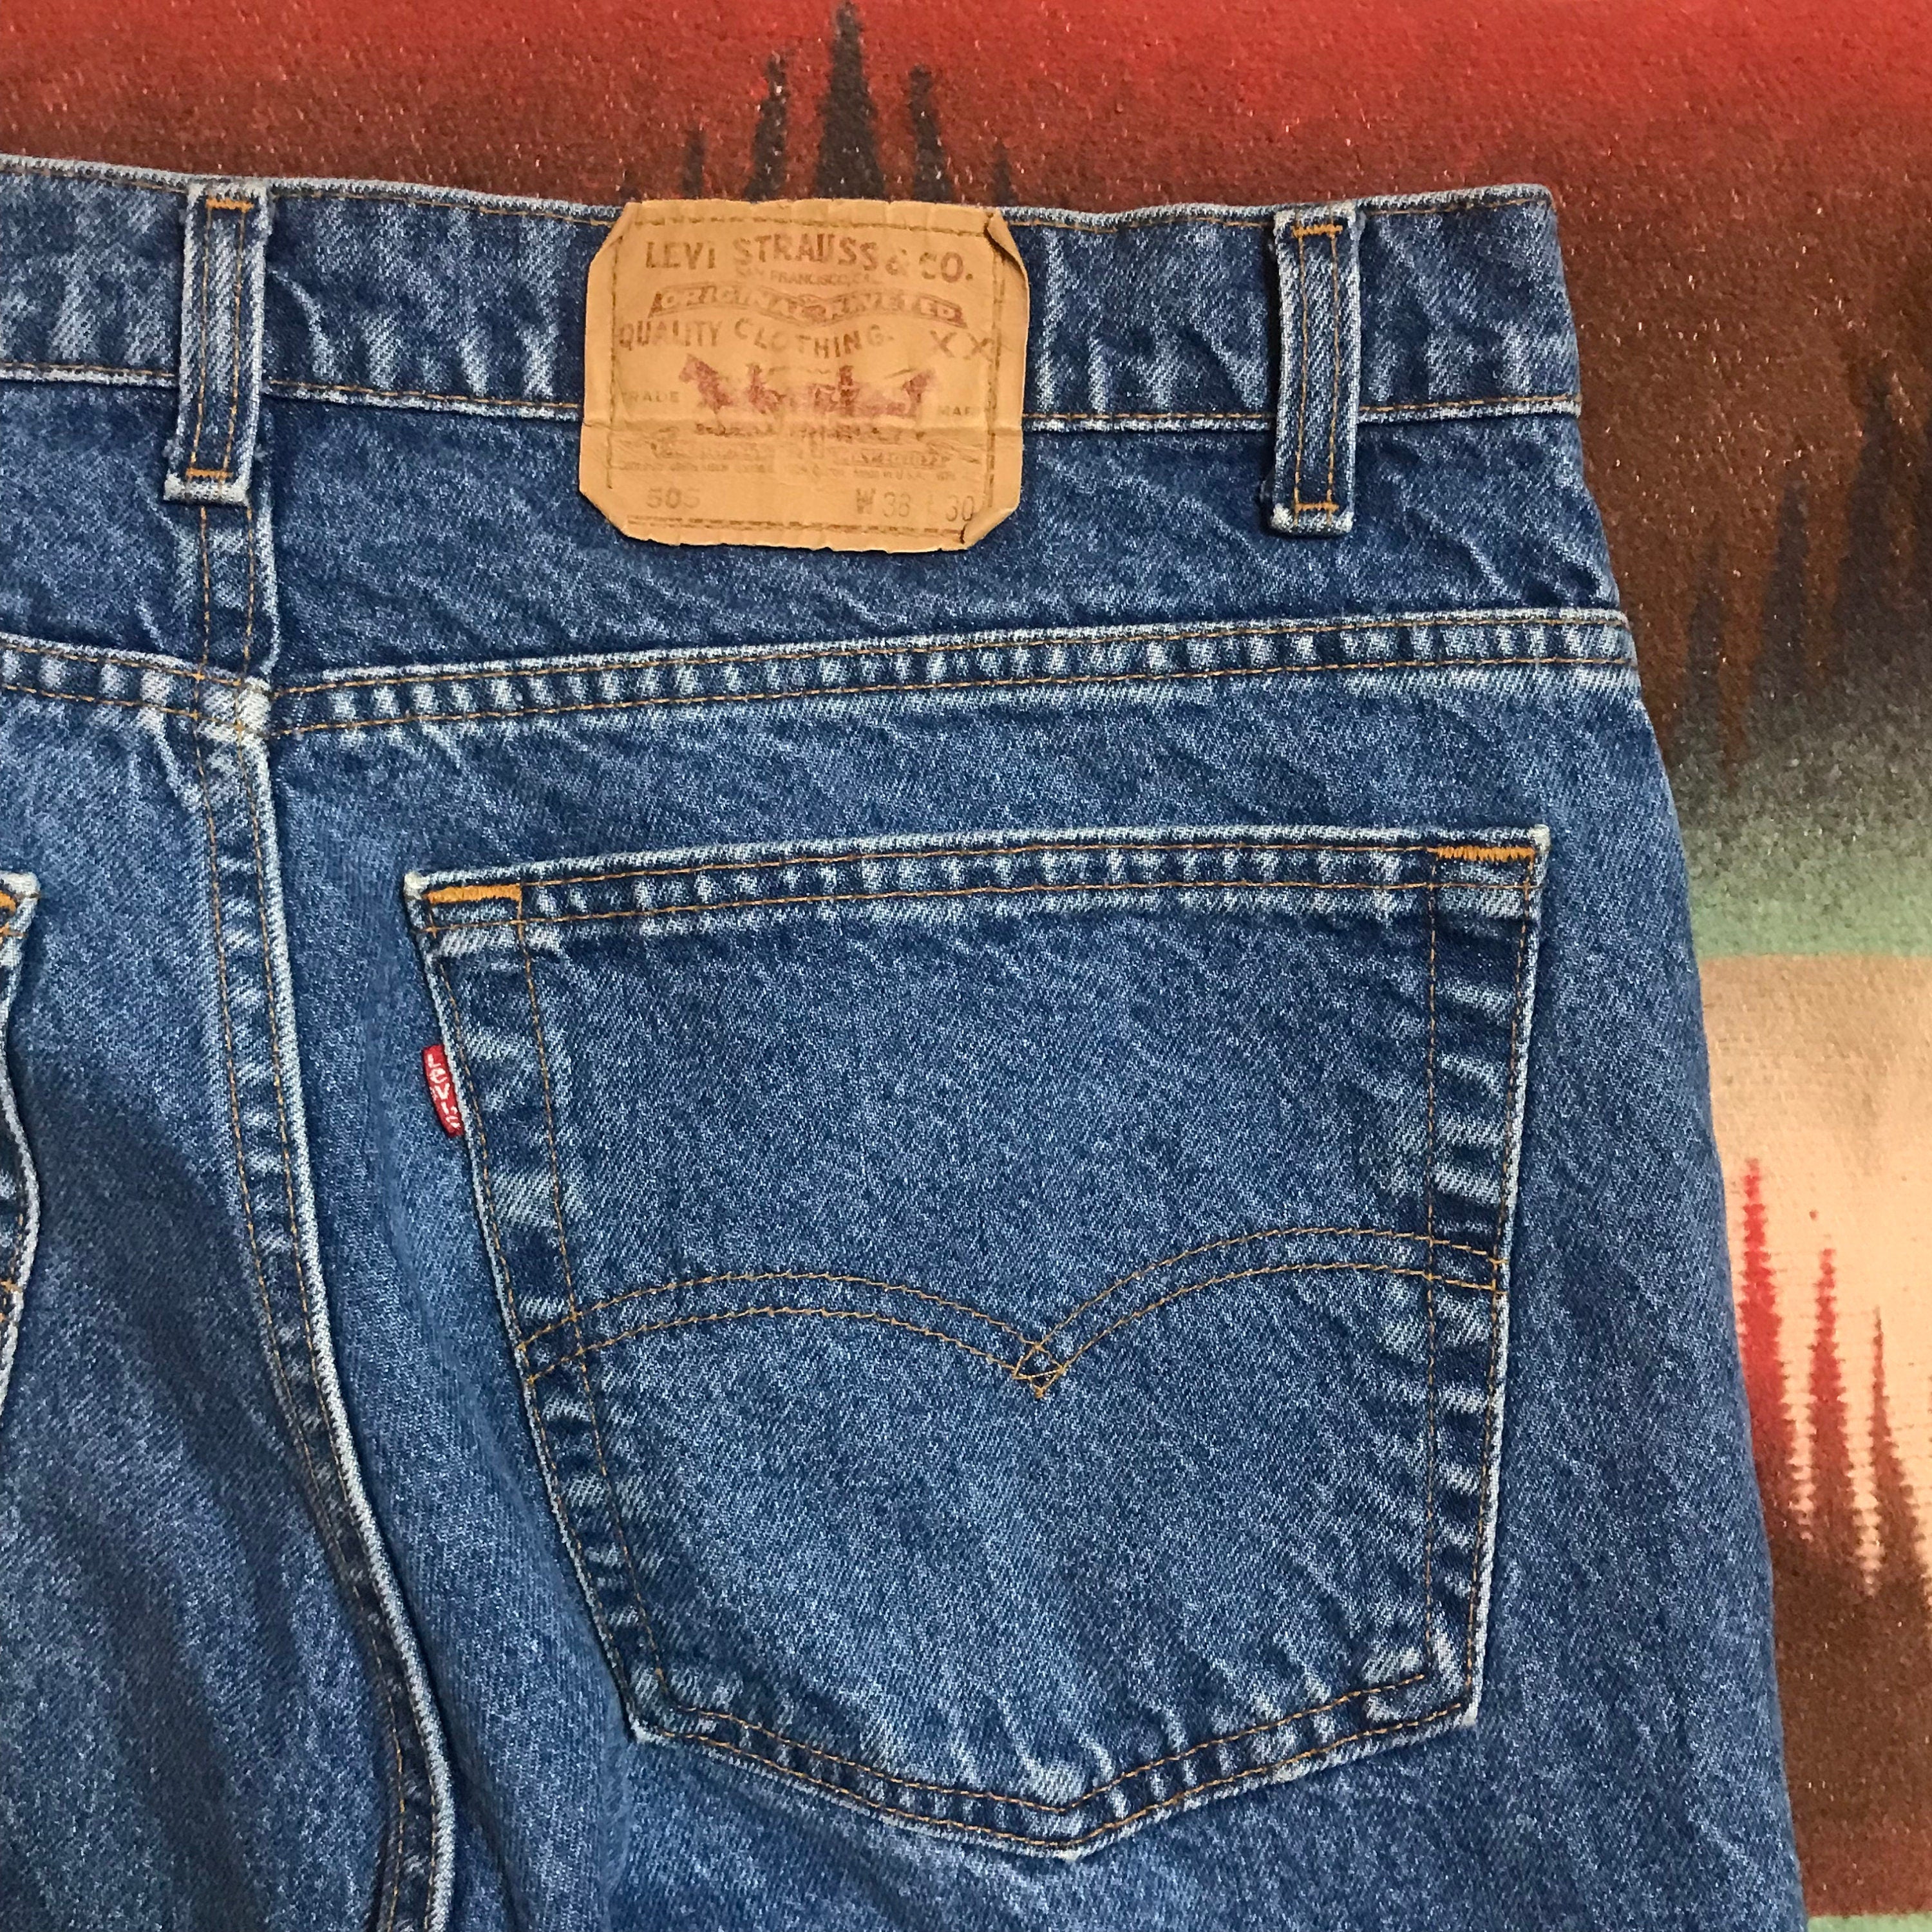 1980s Levi's 505 Jeans Made in USA Size 36x28